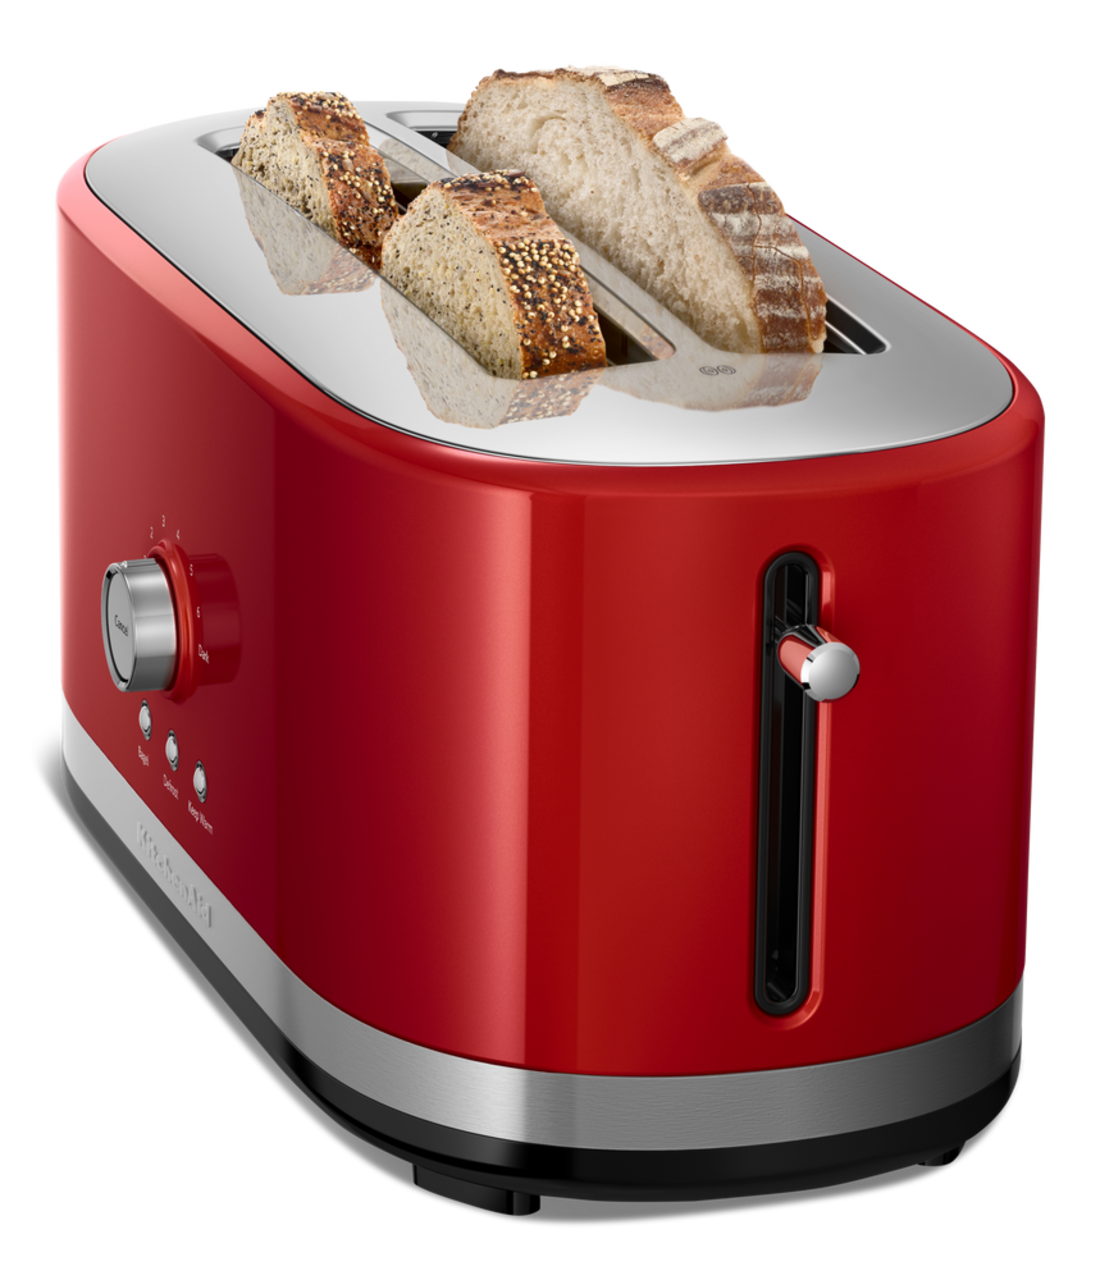 https://media-www.canadiantire.ca/product/living/kitchen/kitchen-appliances/0431486/kithenaid-4-slice-long-slot-toaster-02a9a0e0-fecc-49b2-a639-29c342aca5c0.png?imdensity=1&imwidth=640&impolicy=mZoom